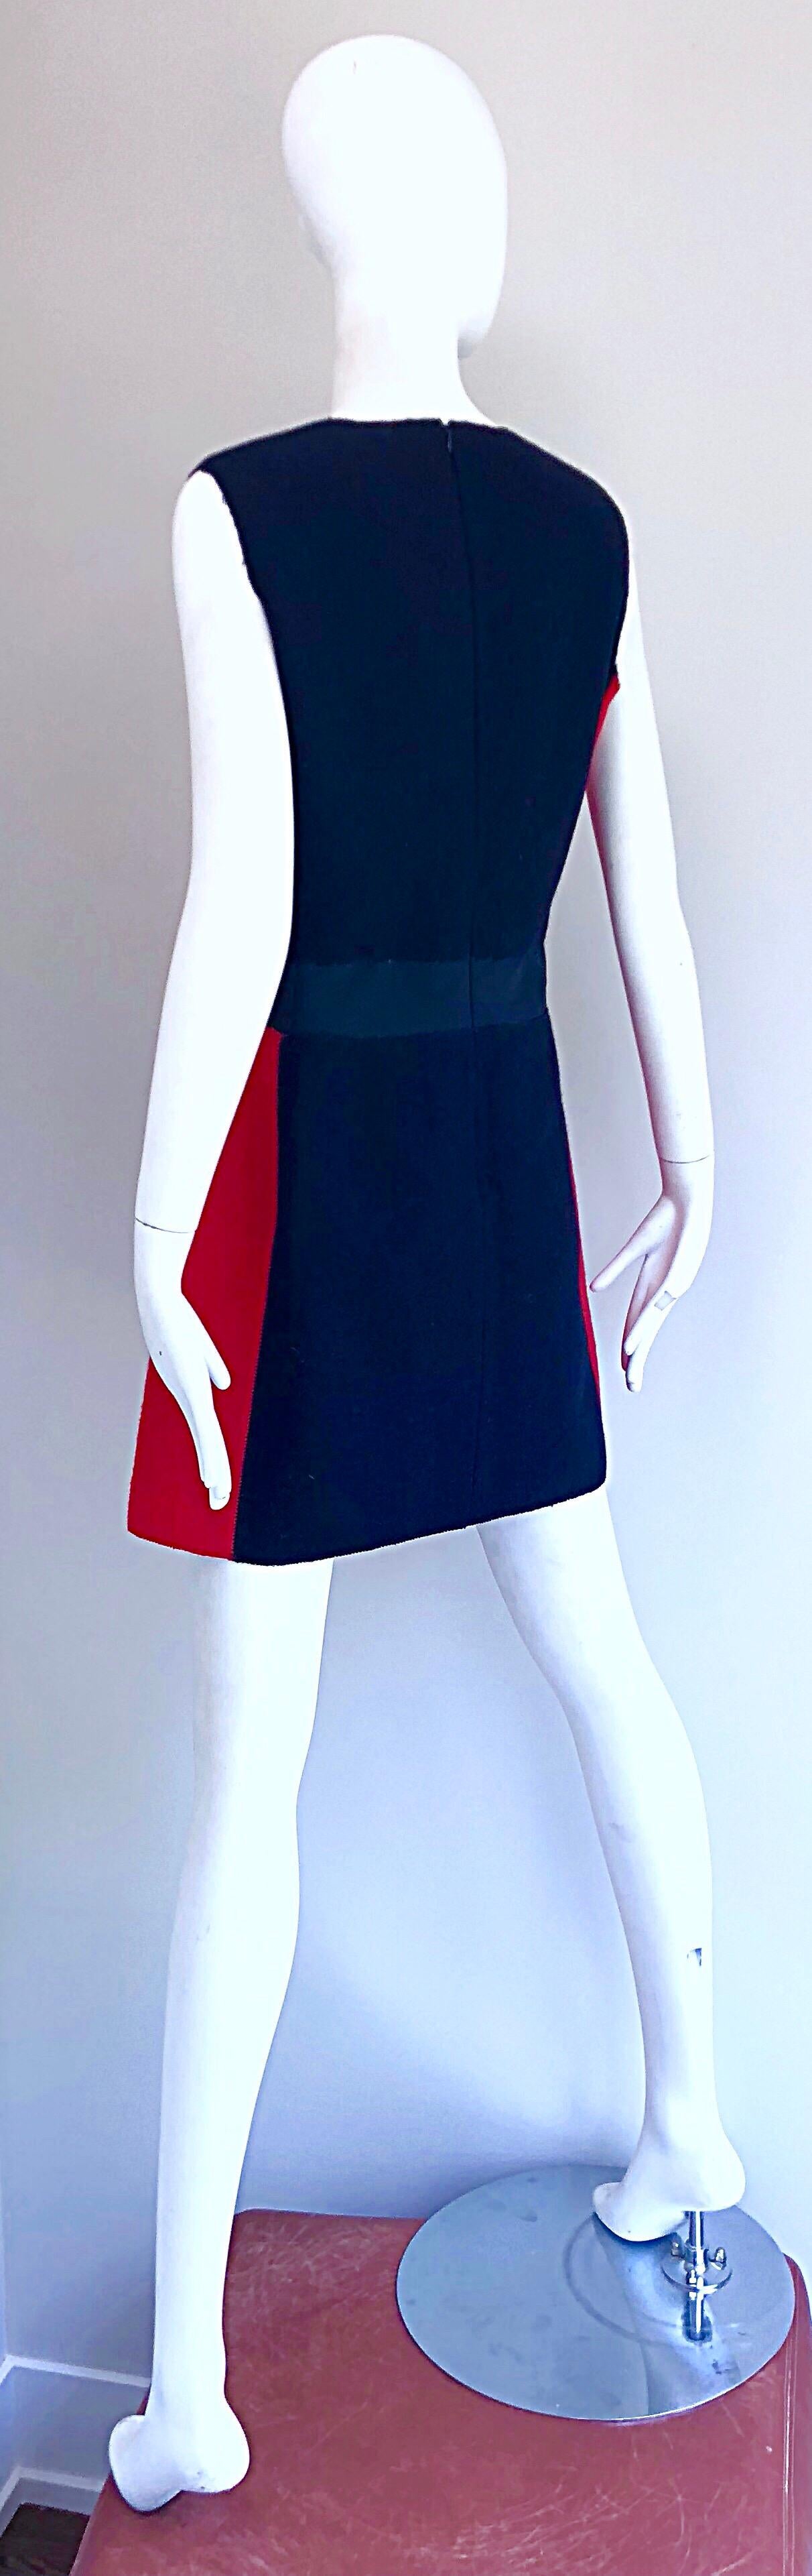 Miu Miu Early 2000s Navy Blue + Red Virgin Wool Size 44 US 8 A - Line Mod Dress For Sale 3